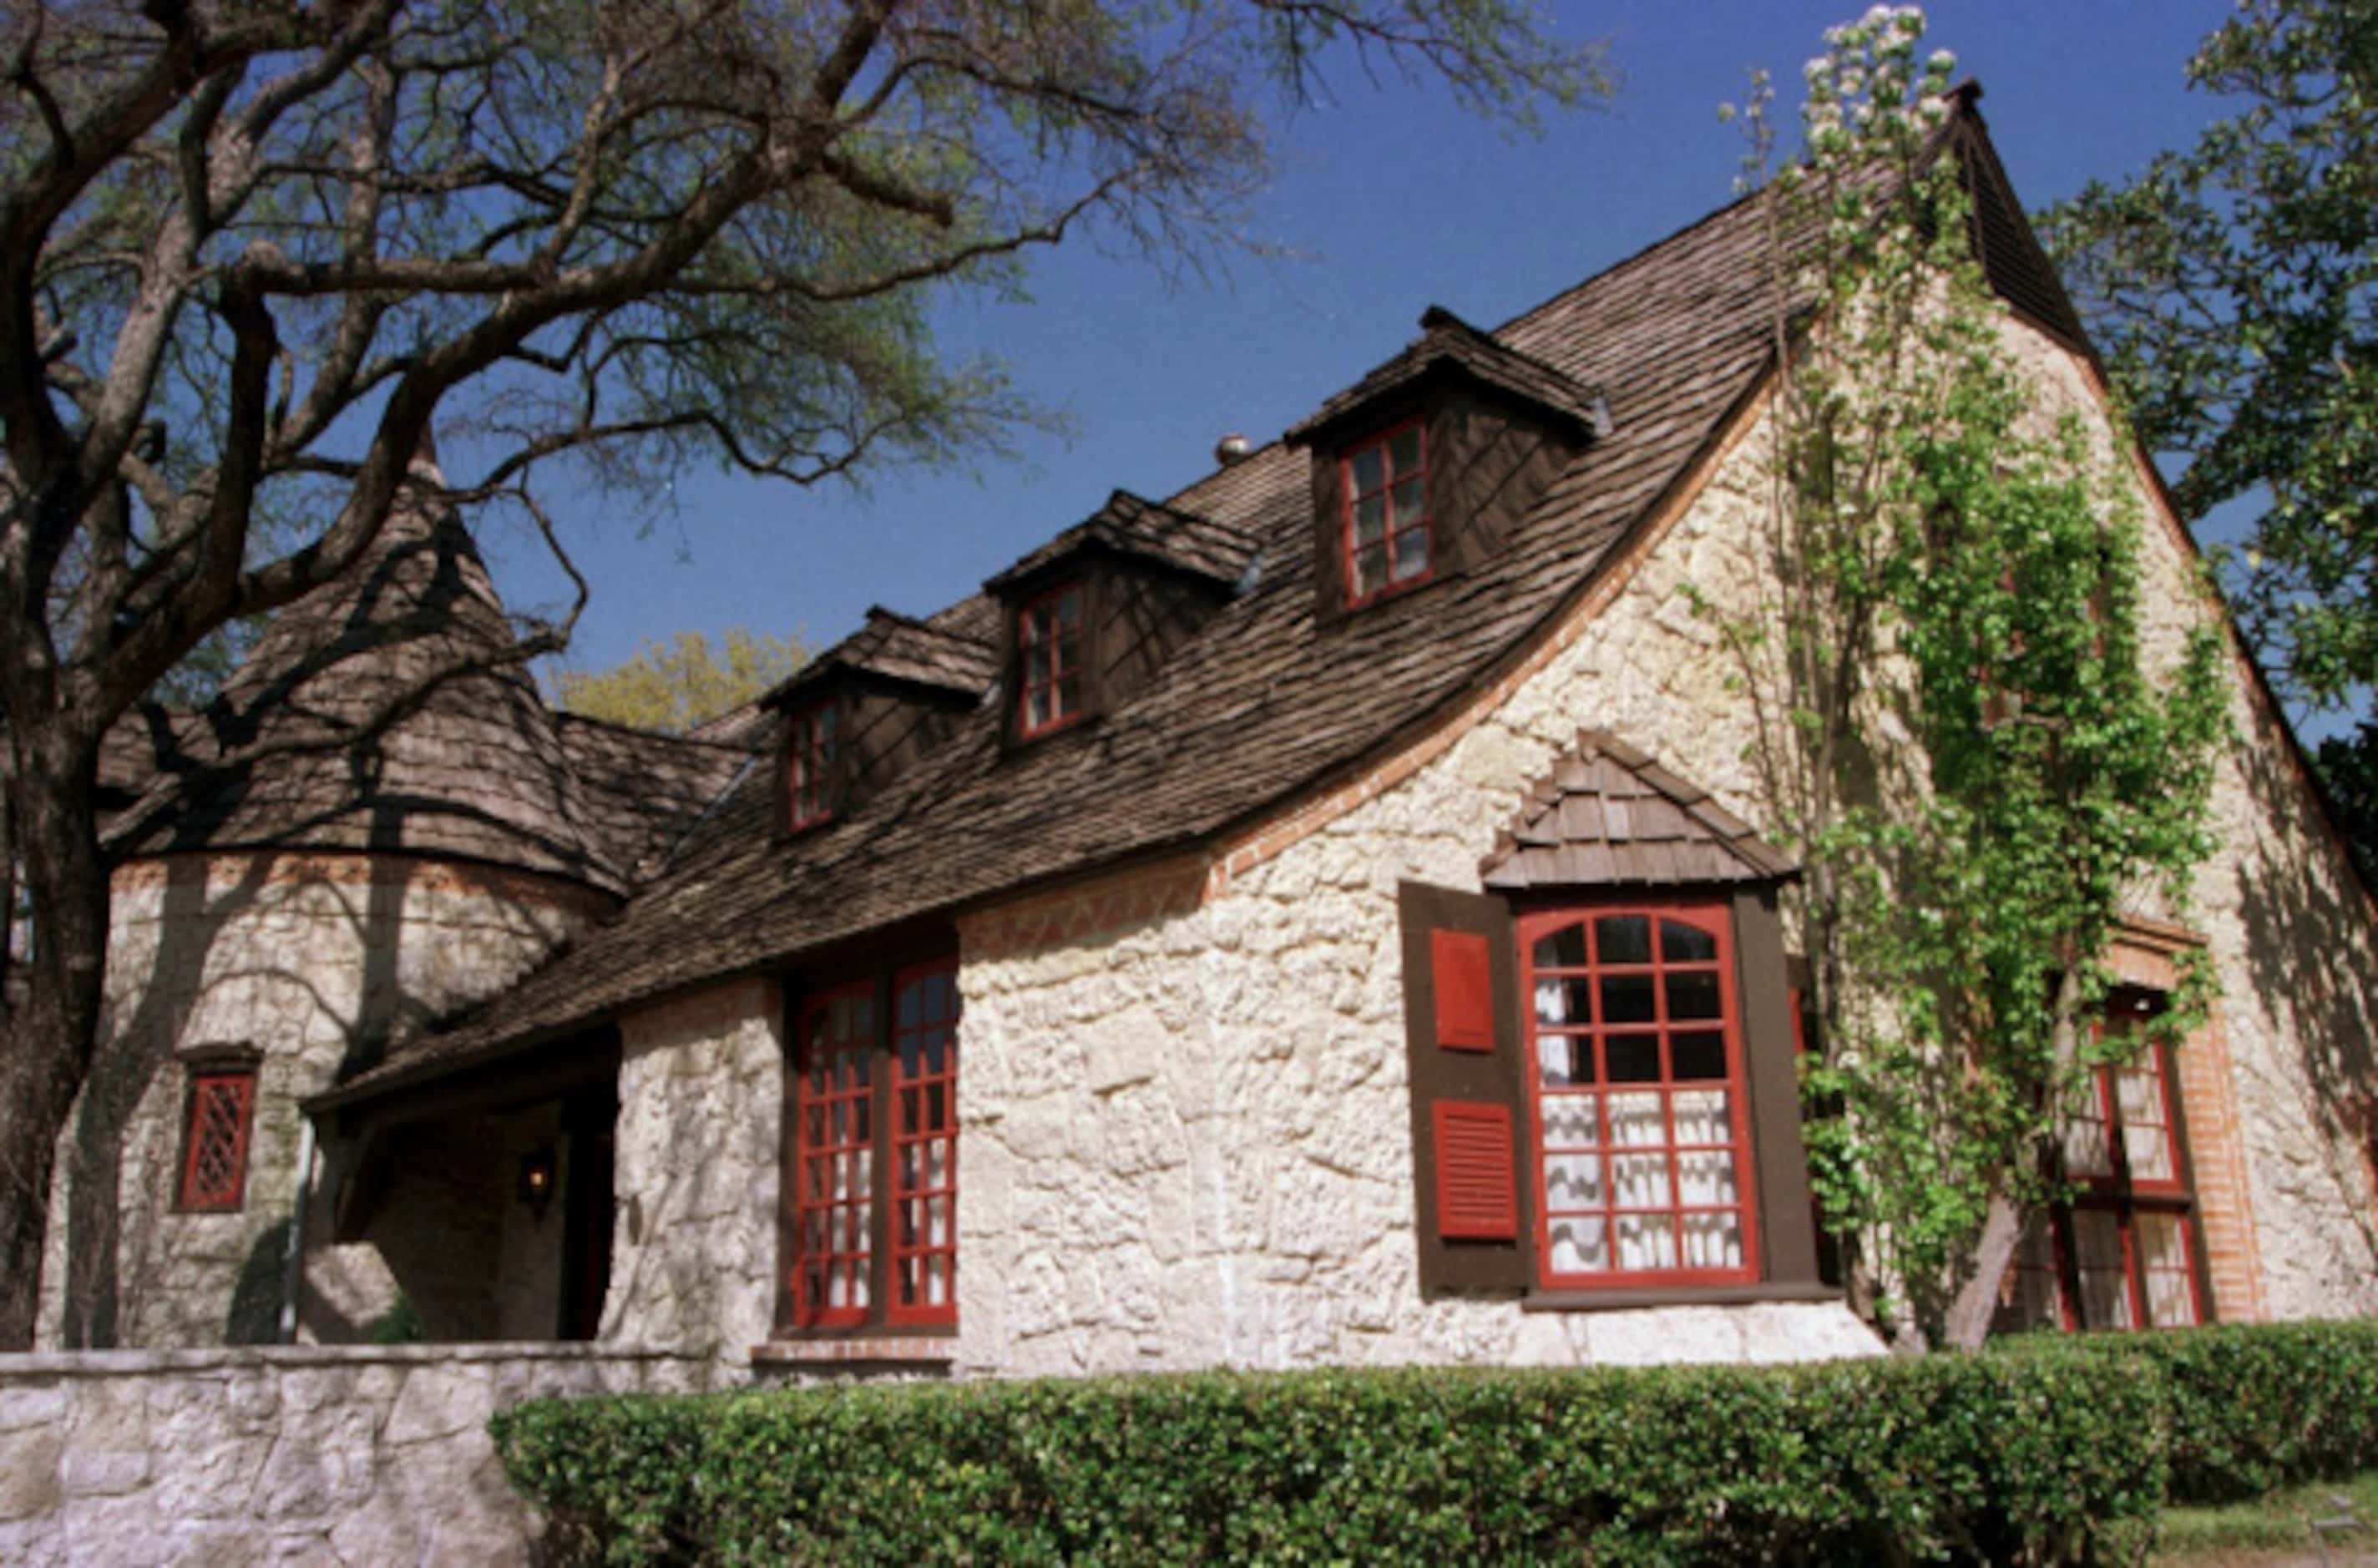 1997: The Meyer home, a Dilbeck work, on Shenandoah, Dallas